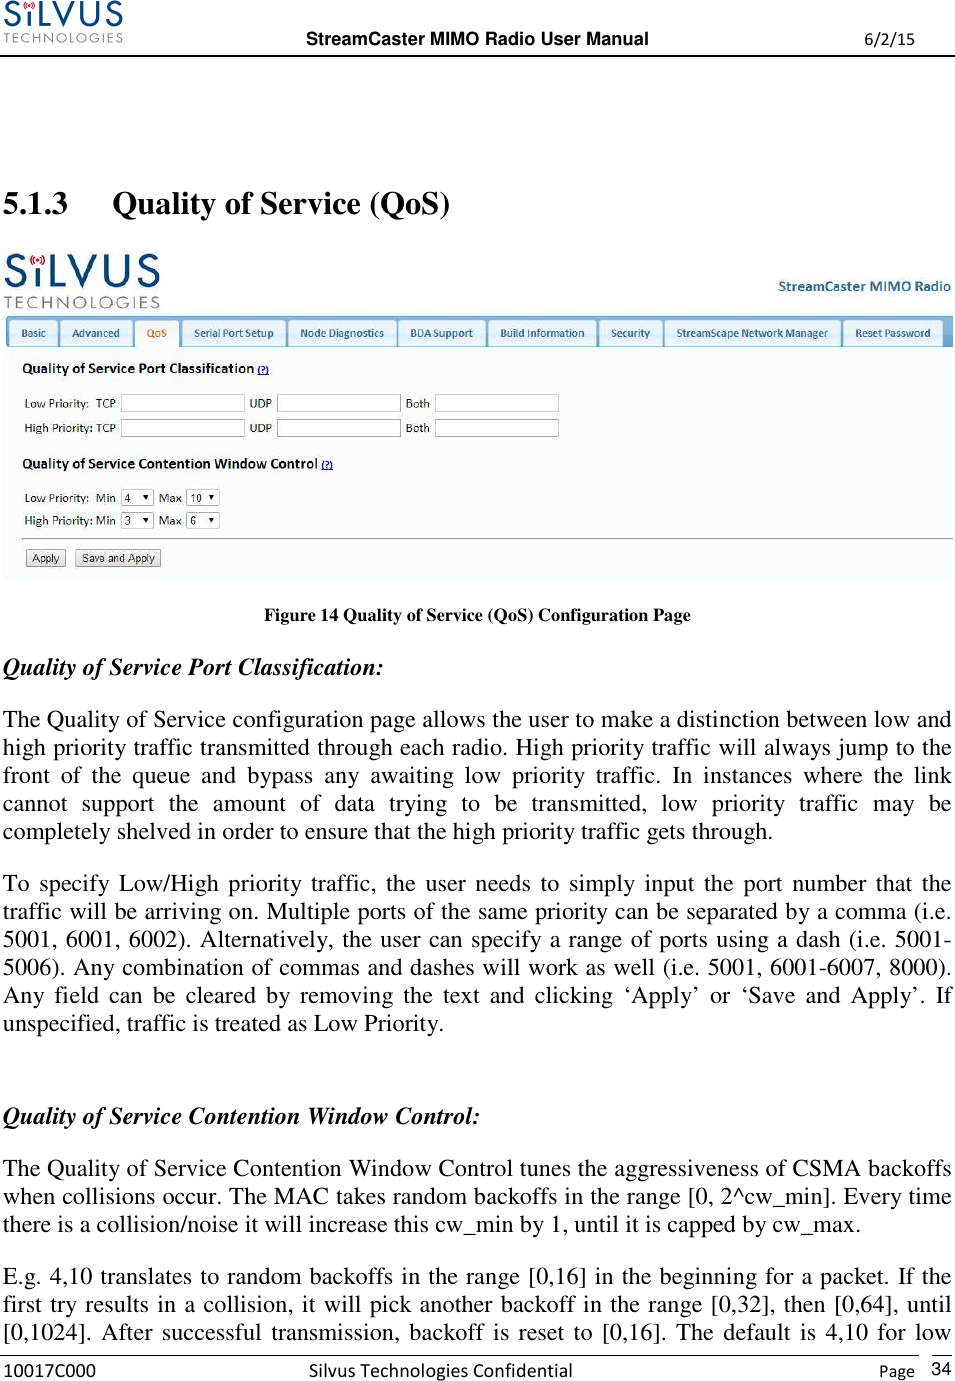  StreamCaster MIMO Radio User Manual  6/2/15 10017C000 Silvus Technologies Confidential    Page   34   5.1.3 Quality of Service (QoS)  Figure 14 Quality of Service (QoS) Configuration Page Quality of Service Port Classification: The Quality of Service configuration page allows the user to make a distinction between low and high priority traffic transmitted through each radio. High priority traffic will always jump to the front  of  the  queue  and  bypass  any  awaiting  low  priority  traffic.  In  instances  where  the  link cannot  support  the  amount  of  data  trying  to  be  transmitted,  low  priority  traffic  may  be completely shelved in order to ensure that the high priority traffic gets through.   To specify Low/High priority traffic, the user needs to simply input the port number that the traffic will be arriving on. Multiple ports of the same priority can be separated by a comma (i.e. 5001, 6001, 6002). Alternatively, the user can specify a range of ports using a dash (i.e. 5001-5006). Any combination of commas and dashes will work as well (i.e. 5001, 6001-6007, 8000). Any field  can  be  cleared  by removing  the  text  and  clicking  ‘Apply’  or  ‘Save  and  Apply’.  If unspecified, traffic is treated as Low Priority.  Quality of Service Contention Window Control: The Quality of Service Contention Window Control tunes the aggressiveness of CSMA backoffs when collisions occur. The MAC takes random backoffs in the range [0, 2^cw_min]. Every time there is a collision/noise it will increase this cw_min by 1, until it is capped by cw_max. E.g. 4,10 translates to random backoffs in the range [0,16] in the beginning for a packet. If the first try results in a collision, it will pick another backoff in the range [0,32], then [0,64], until [0,1024]. After successful transmission, backoff is reset to [0,16]. The default is 4,10 for low 